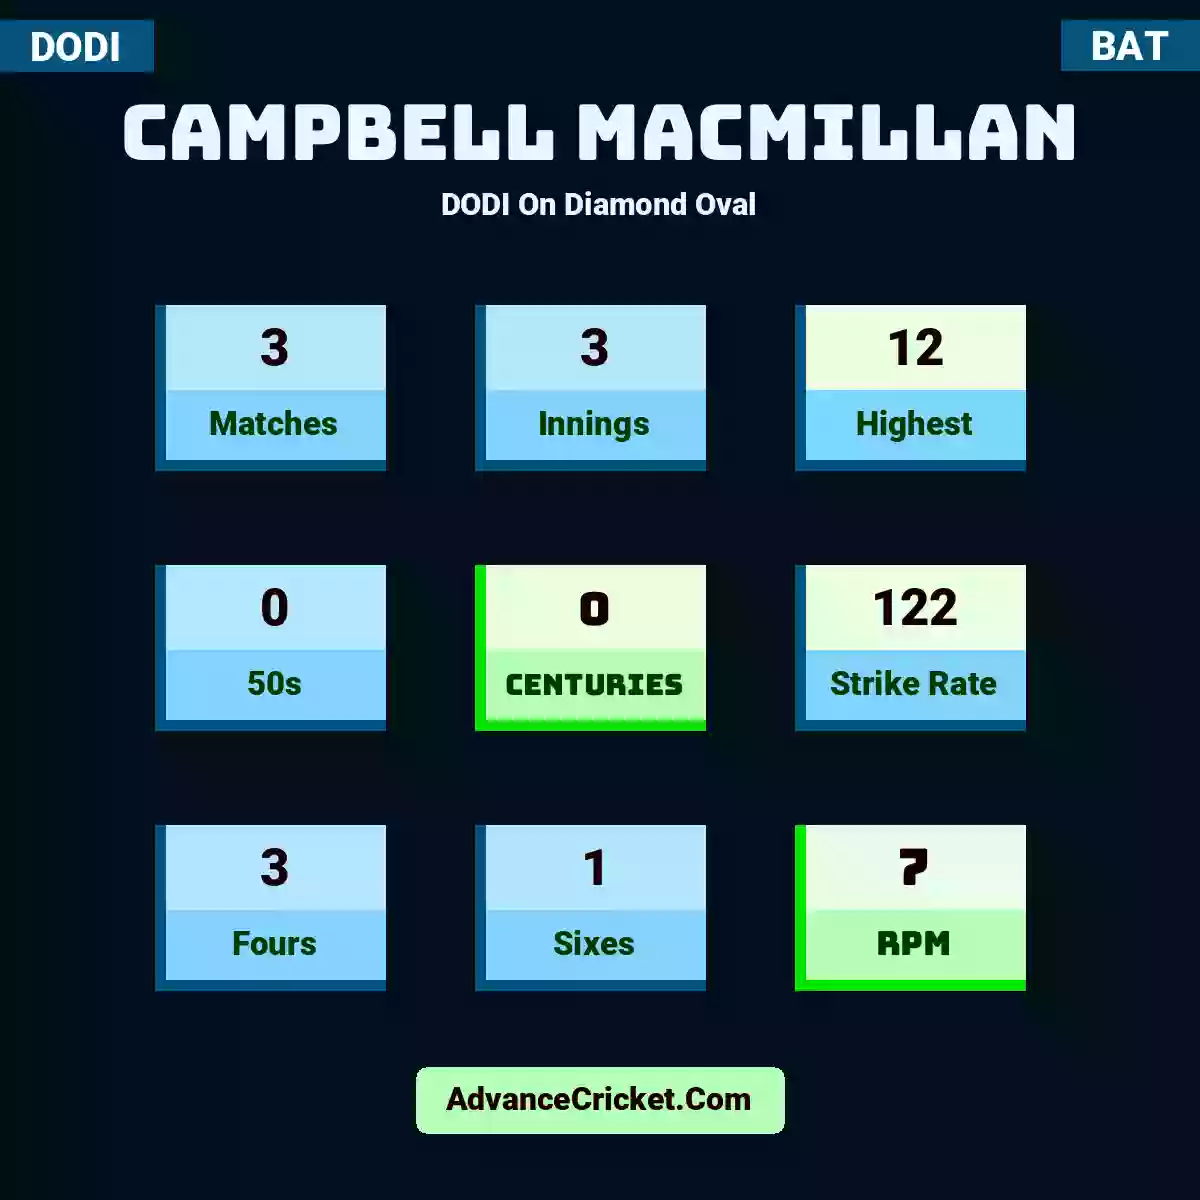 Campbell Macmillan DODI  On Diamond Oval, Campbell Macmillan played 3 matches, scored 12 runs as highest, 0 half-centuries, and 0 centuries, with a strike rate of 122. C.Macmillan hit 3 fours and 1 sixes, with an RPM of 7.